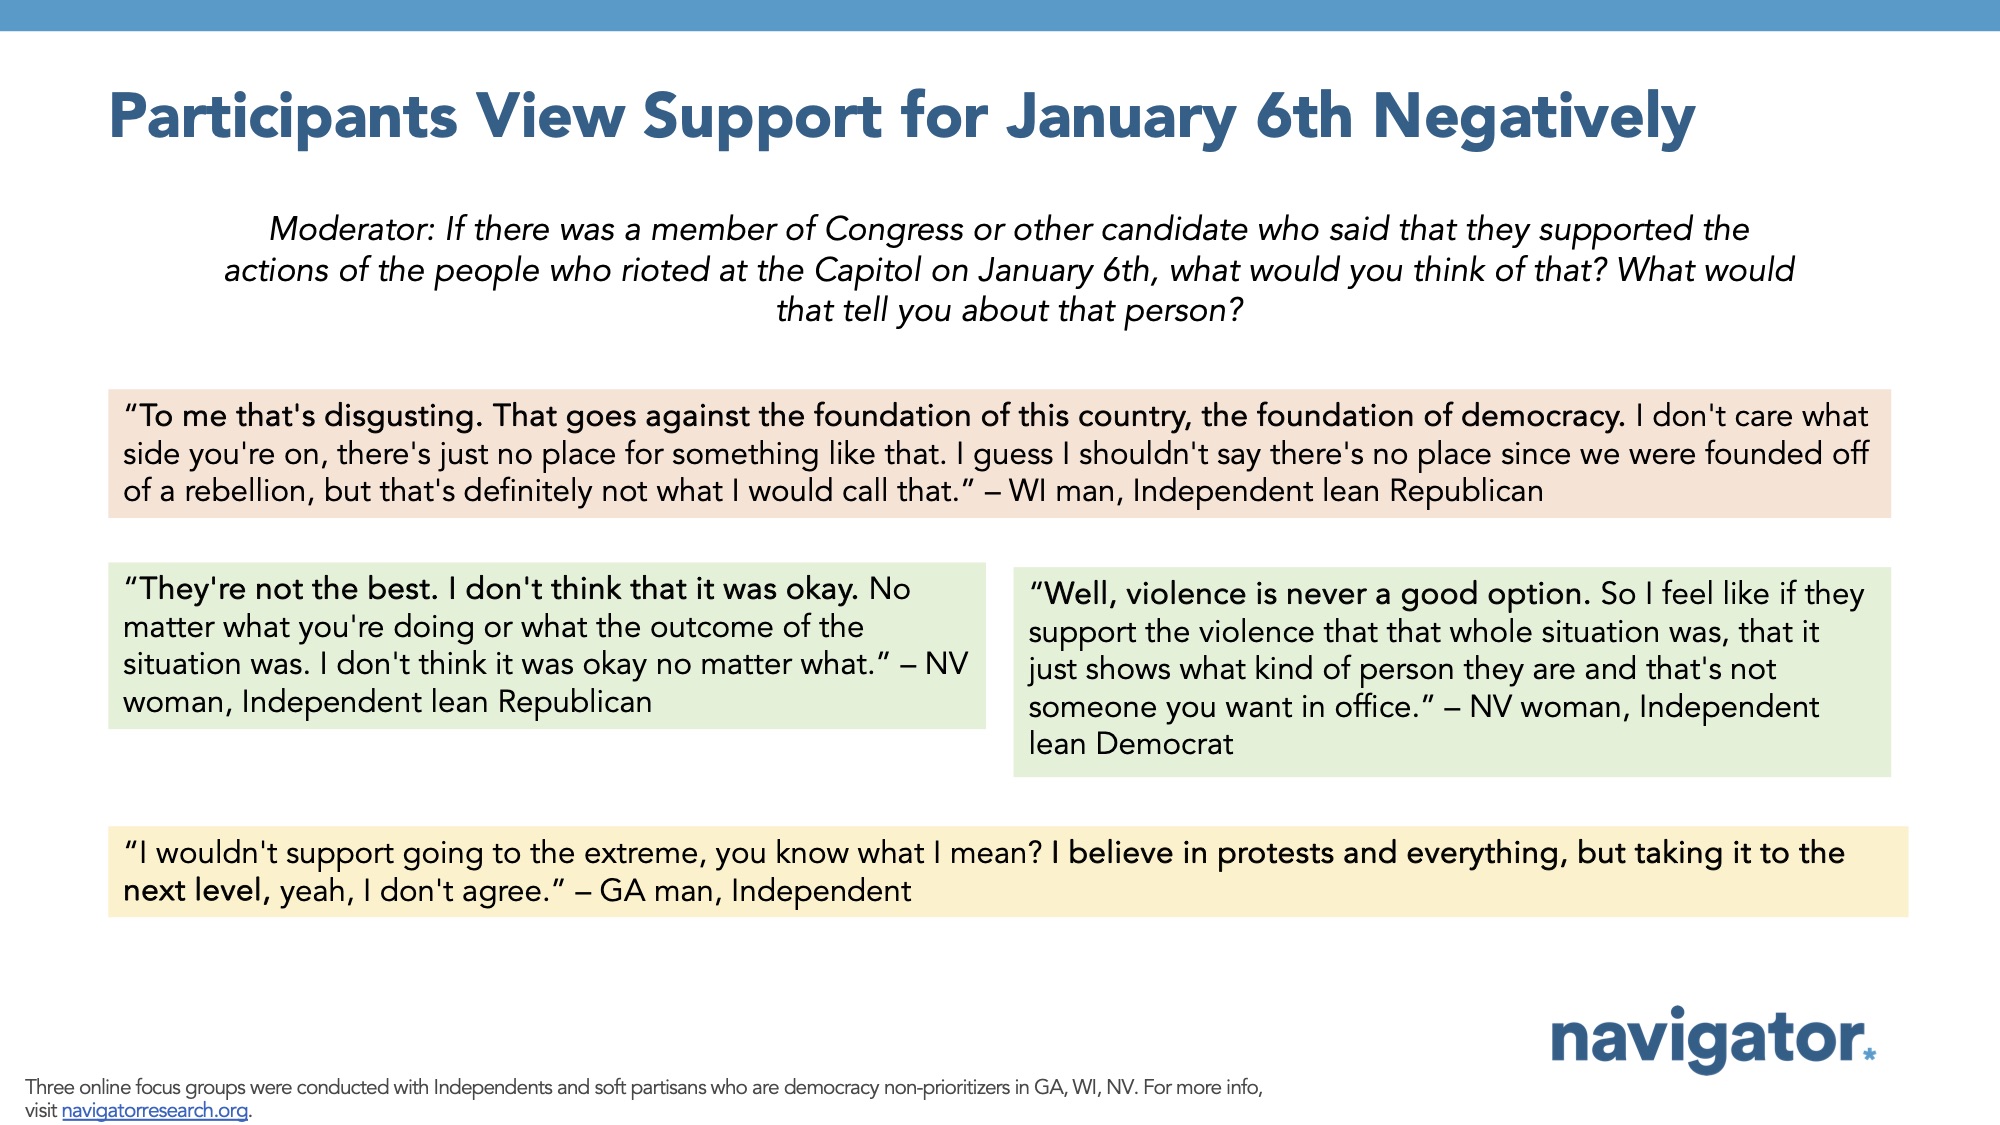 Focus group report slide titled: Participants View Support for January 6th Negatively